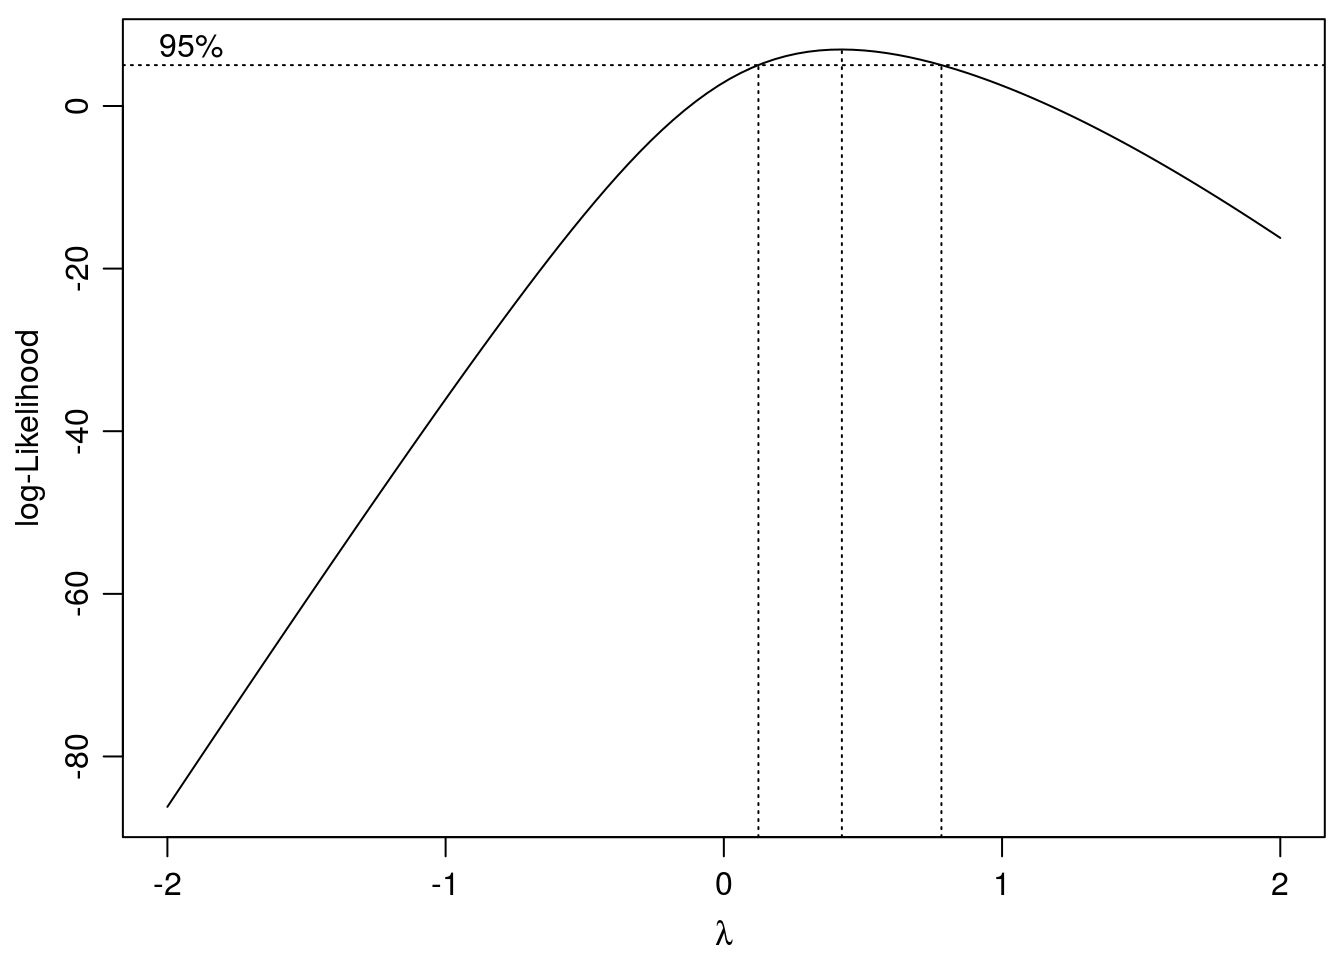 Search for optimum \(\lambda\) with confidence intervals. The chosen \(\lambda\) is 0.42.